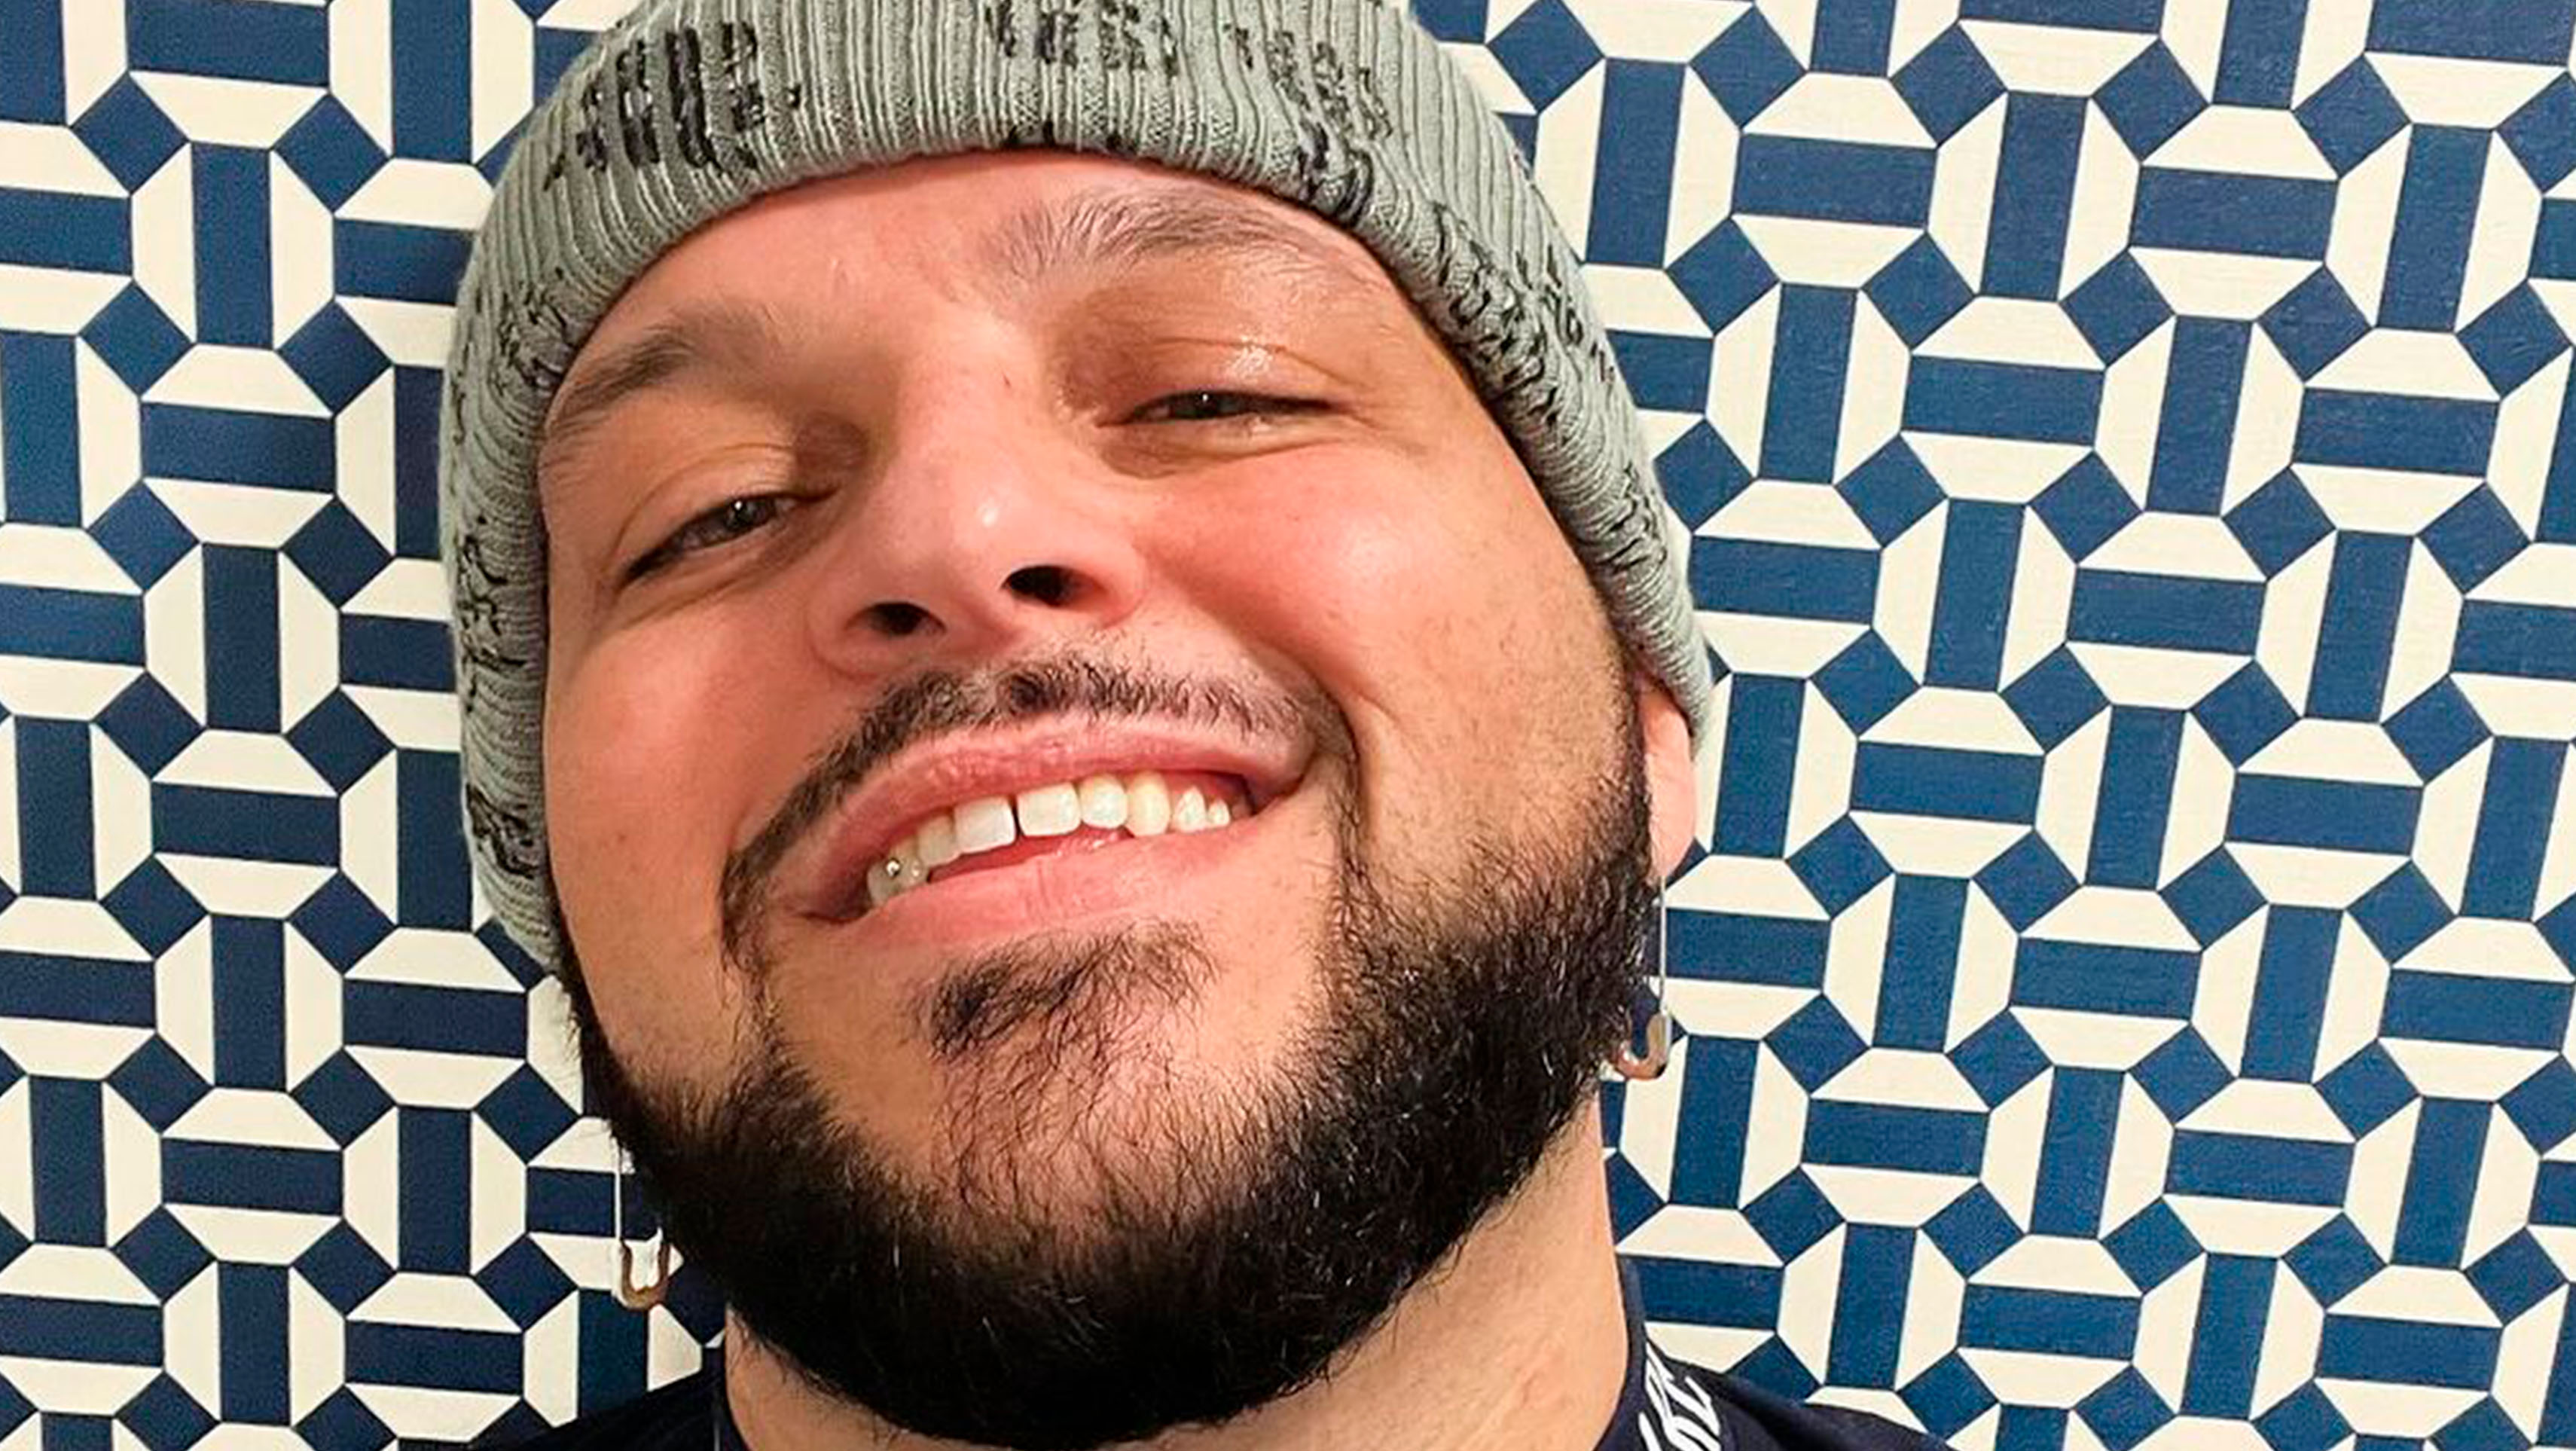 Actor Daniel Franzese has played small roles since Mean Girls